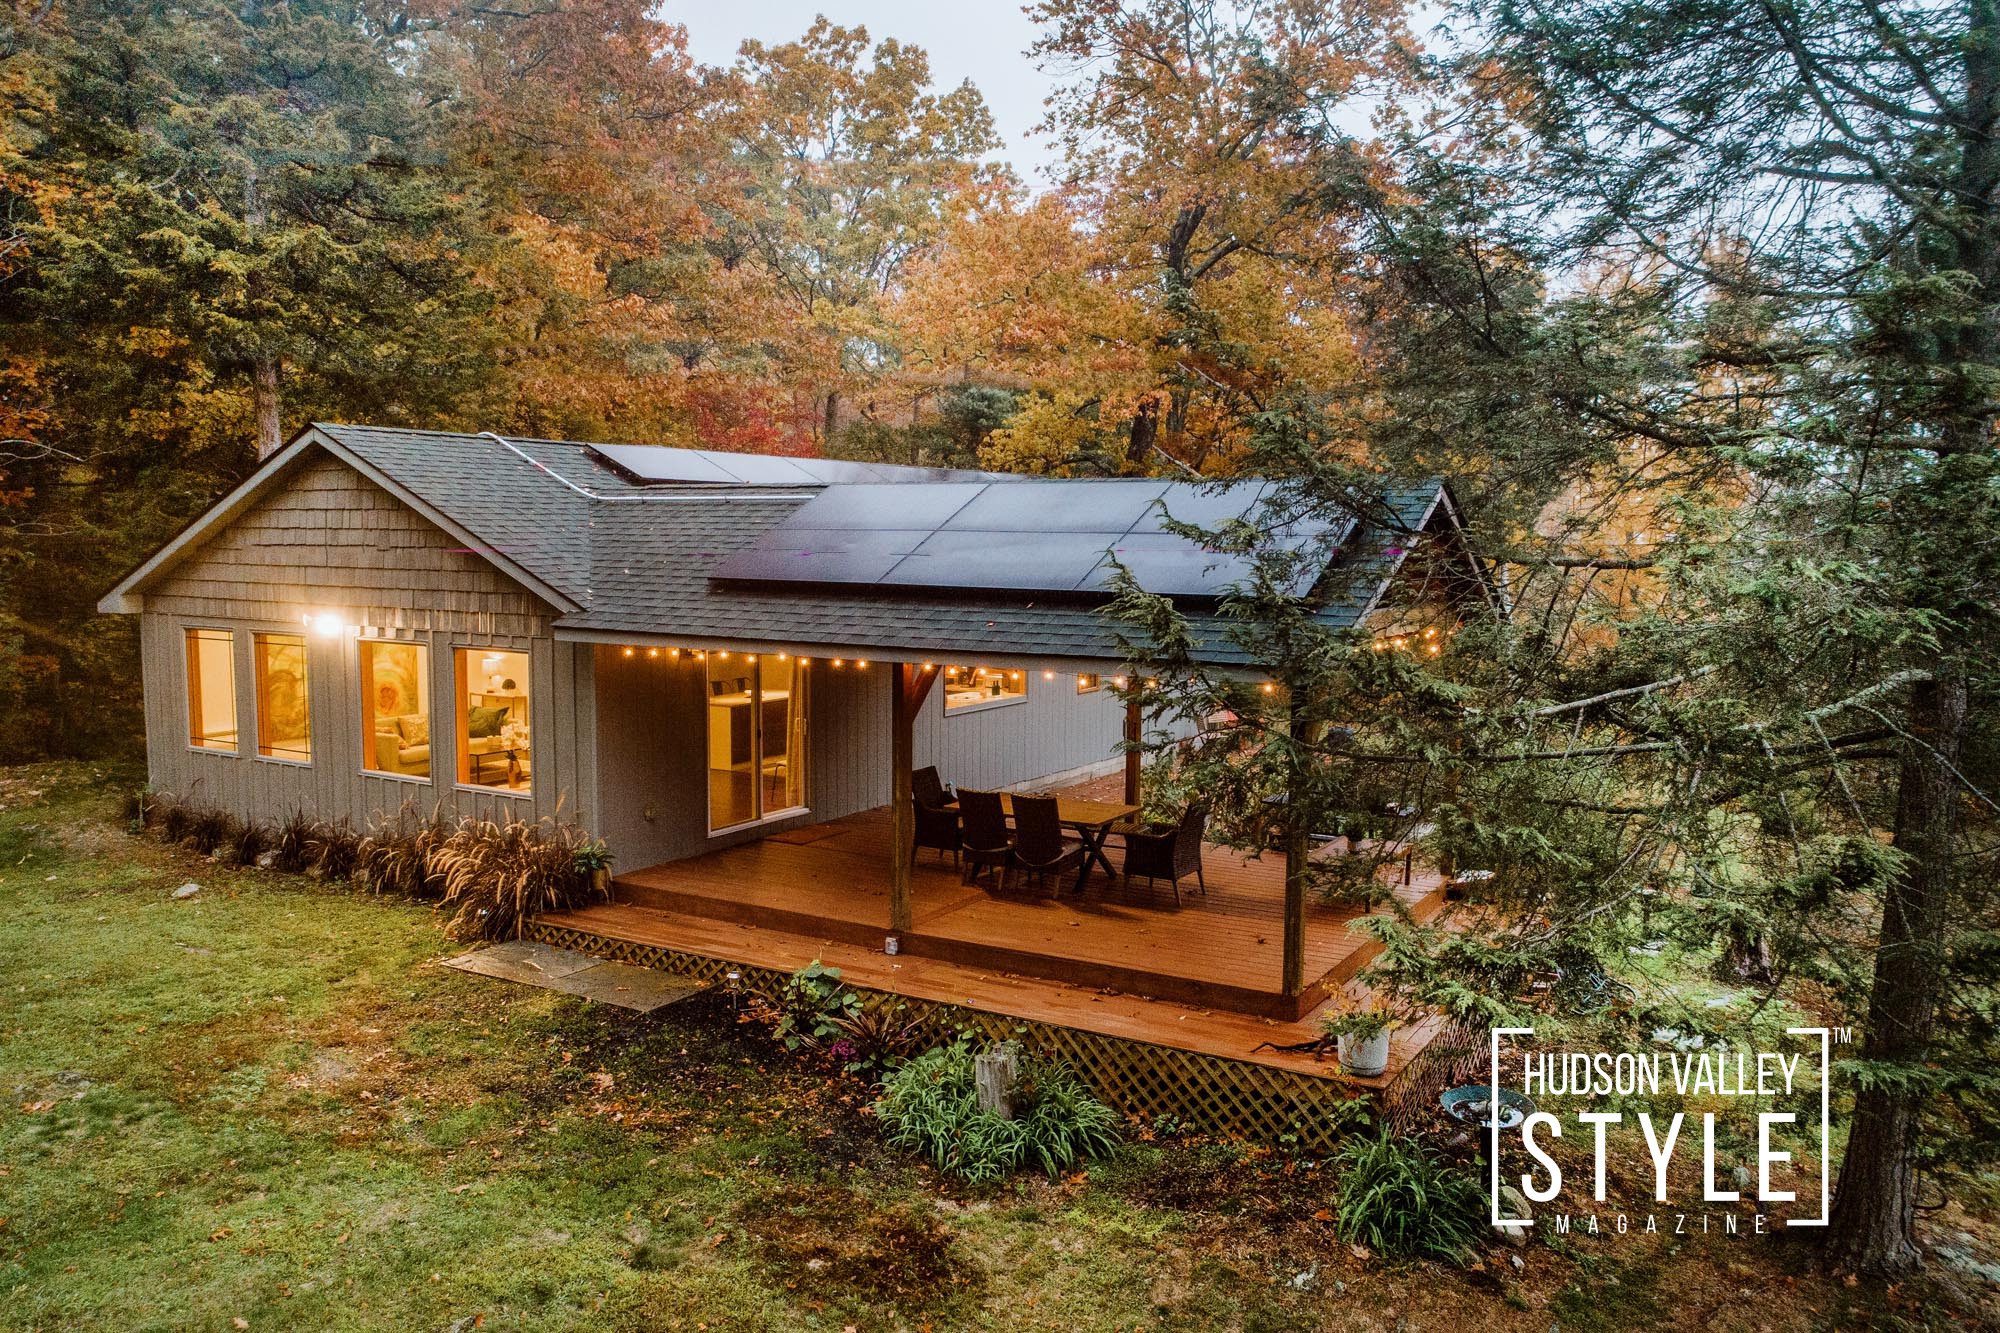 Discover The Secluded Mountaintop Getaway: A Modern Rustic Airbnb Cabin in the Hudson Valley – Presented by Alluvion Vacations